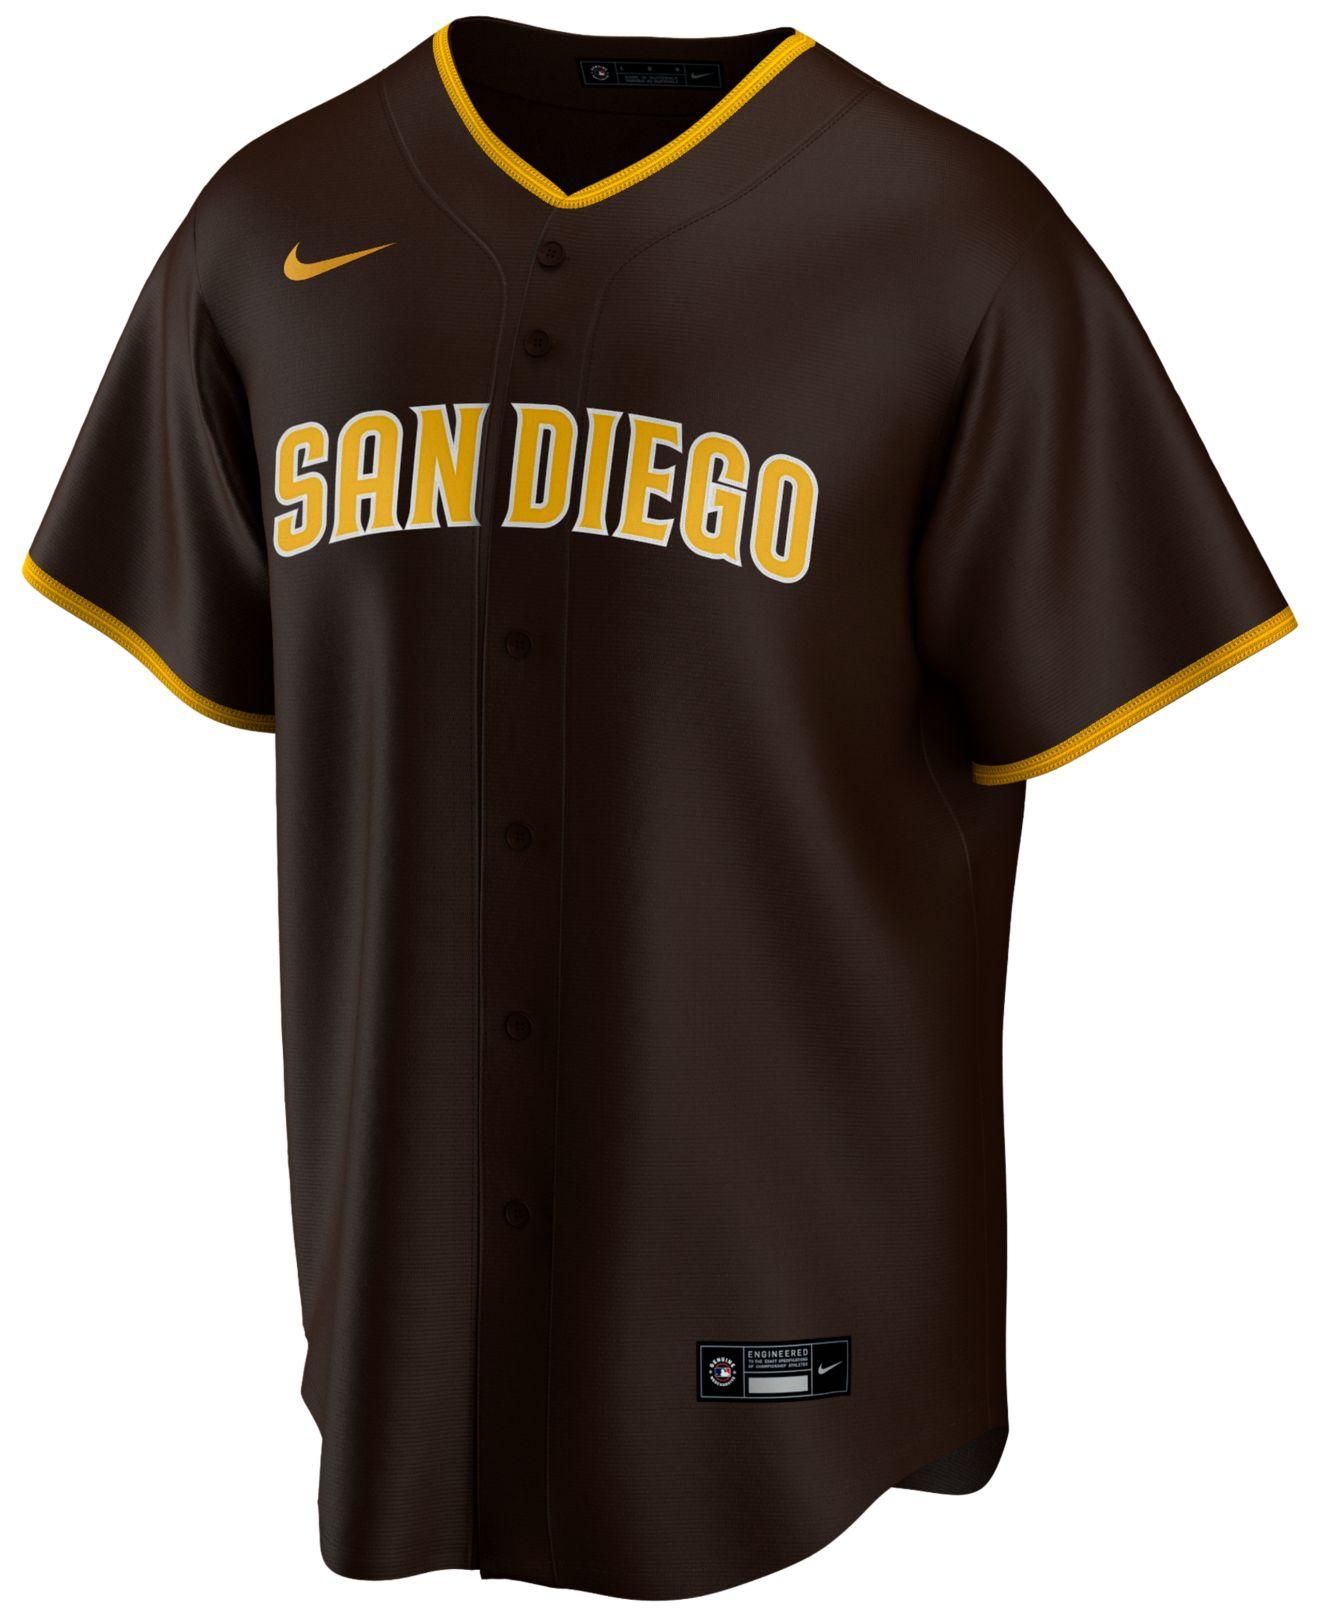 Nike Synthetic San Diego Padres Official Blank Replica ...